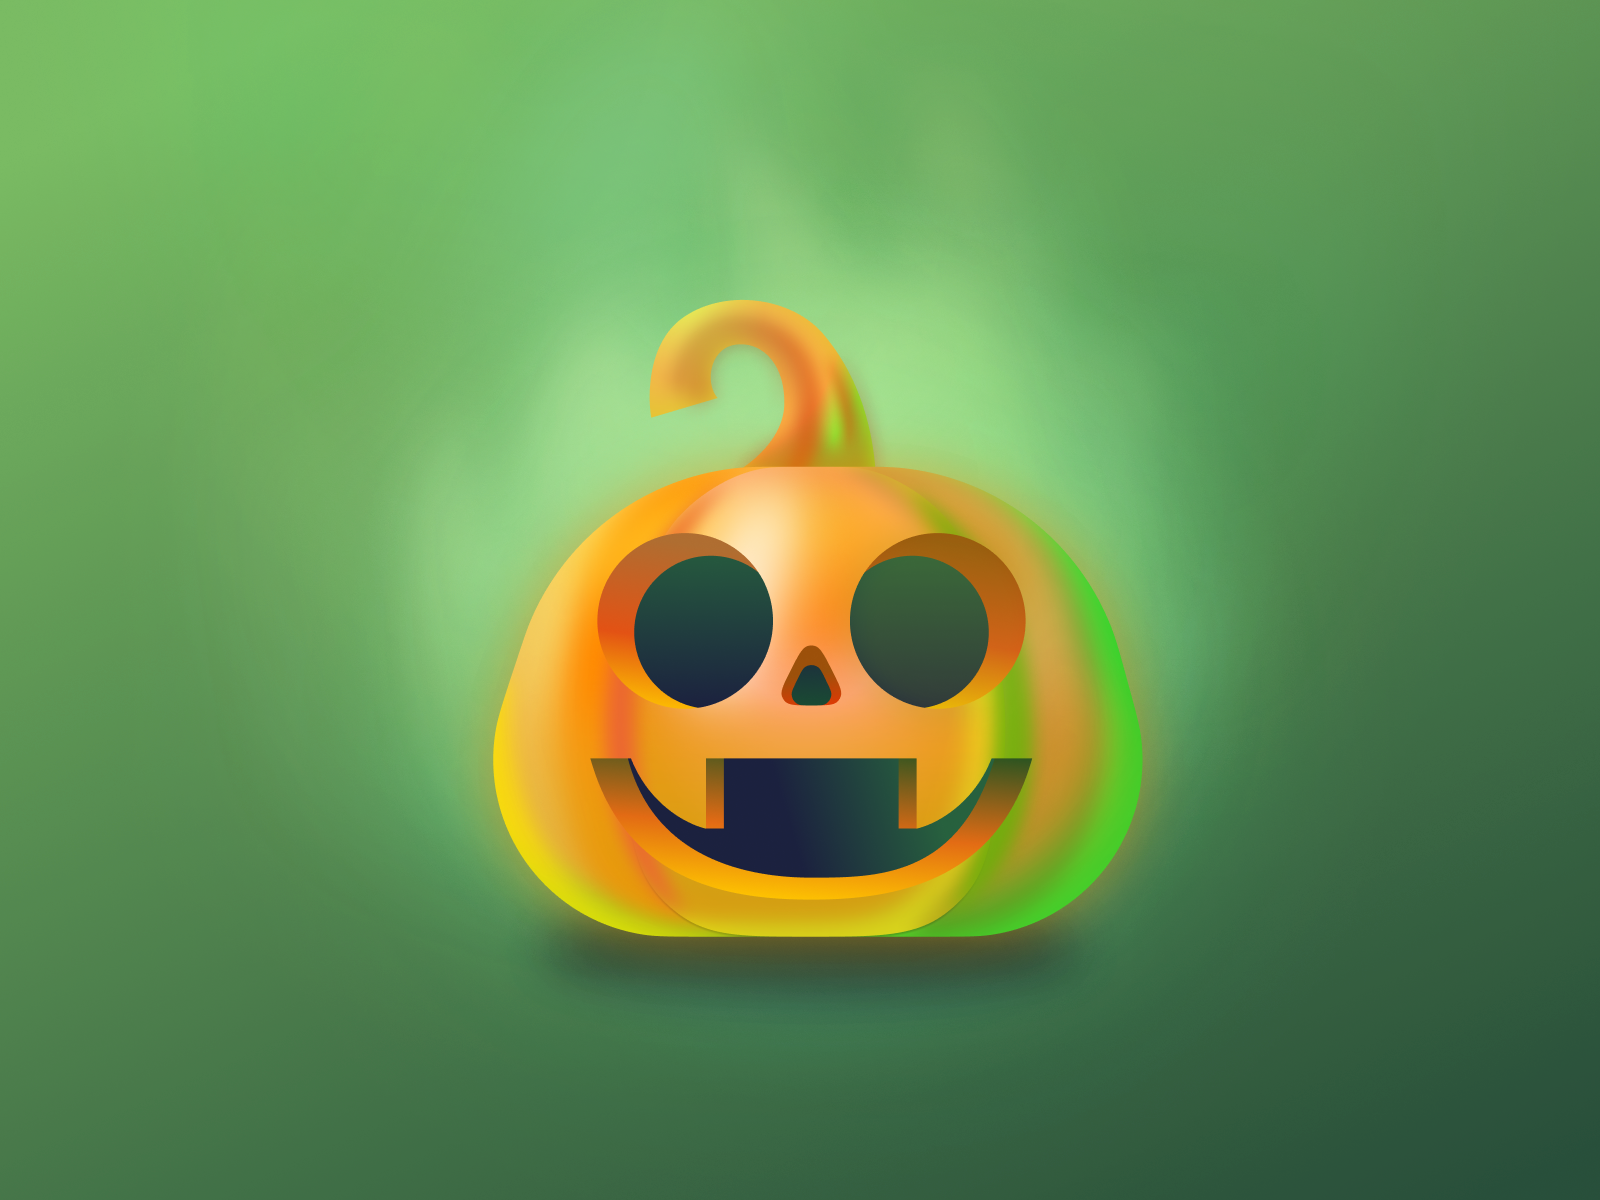 Halloween 🎃👻😜 by 𝐌𝐨𝐯𝐢𝐜𝐚 on Dribbble